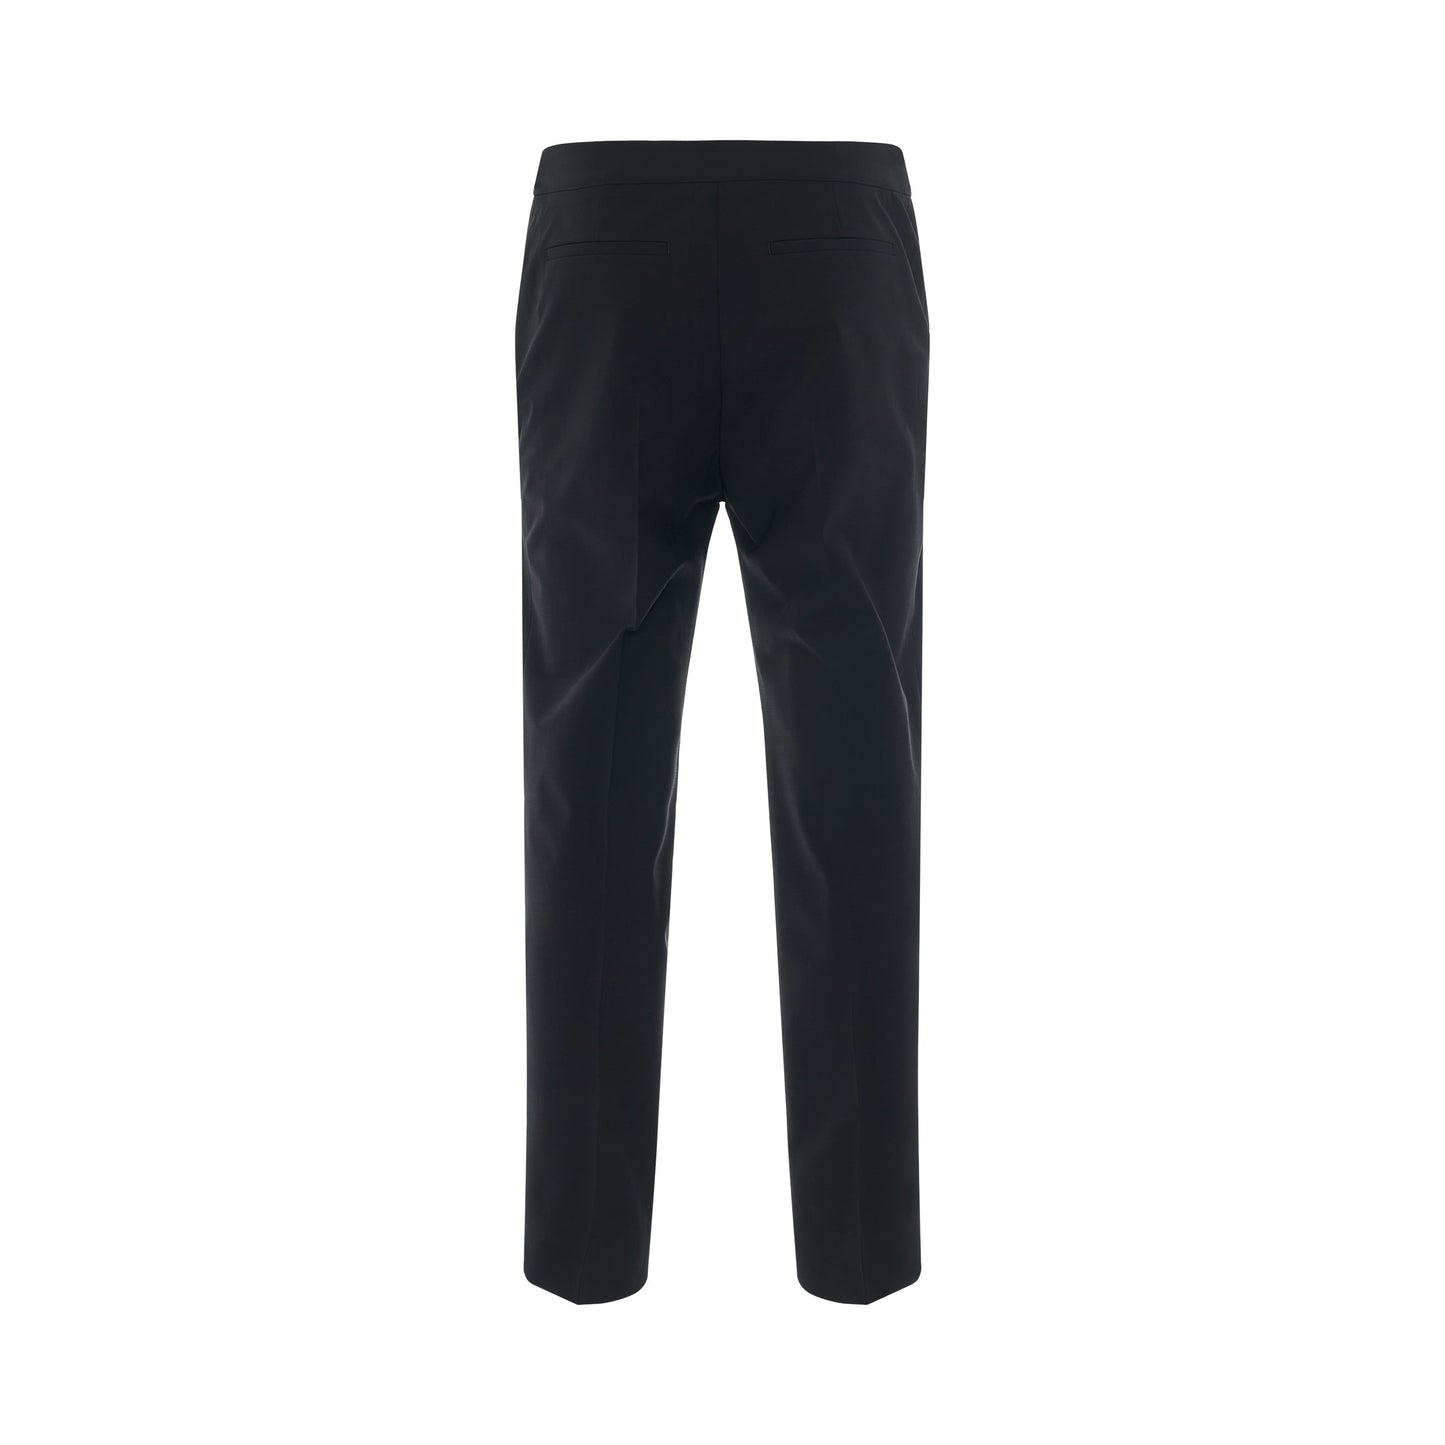 Slim Fit Trousers with Skirt Detail in Black